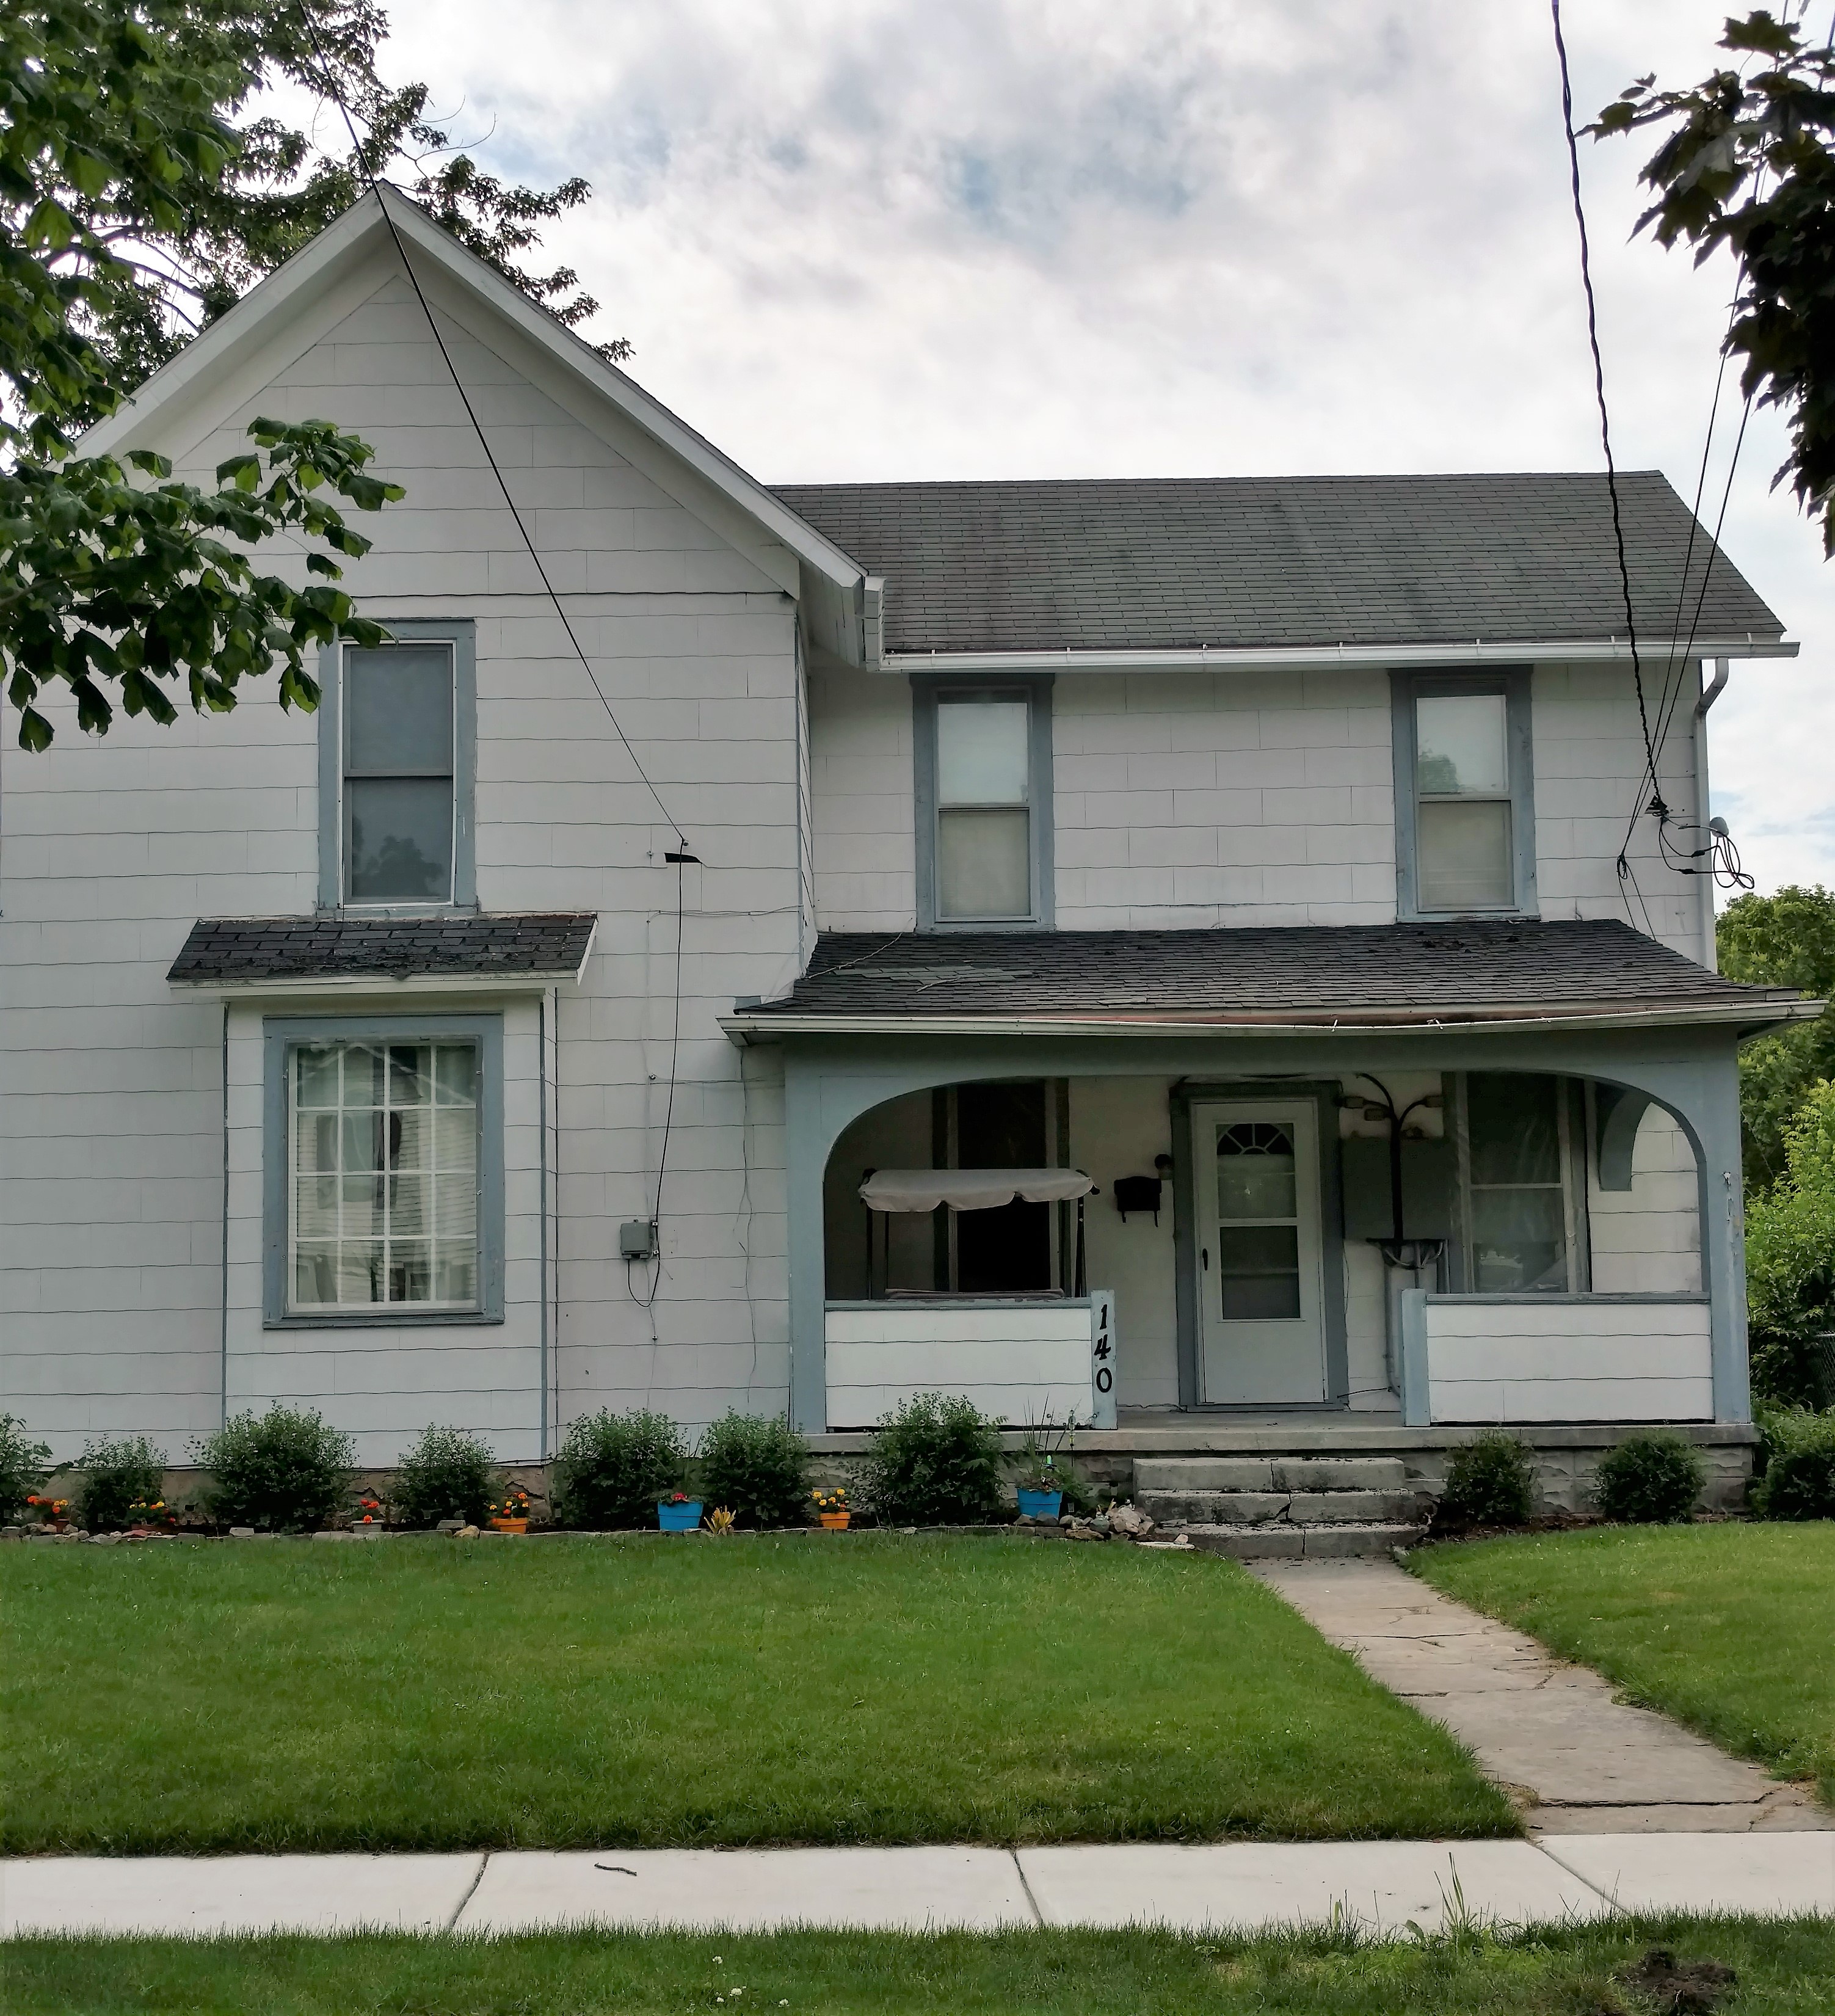 140 S. Maple St., Bowling Green, OH